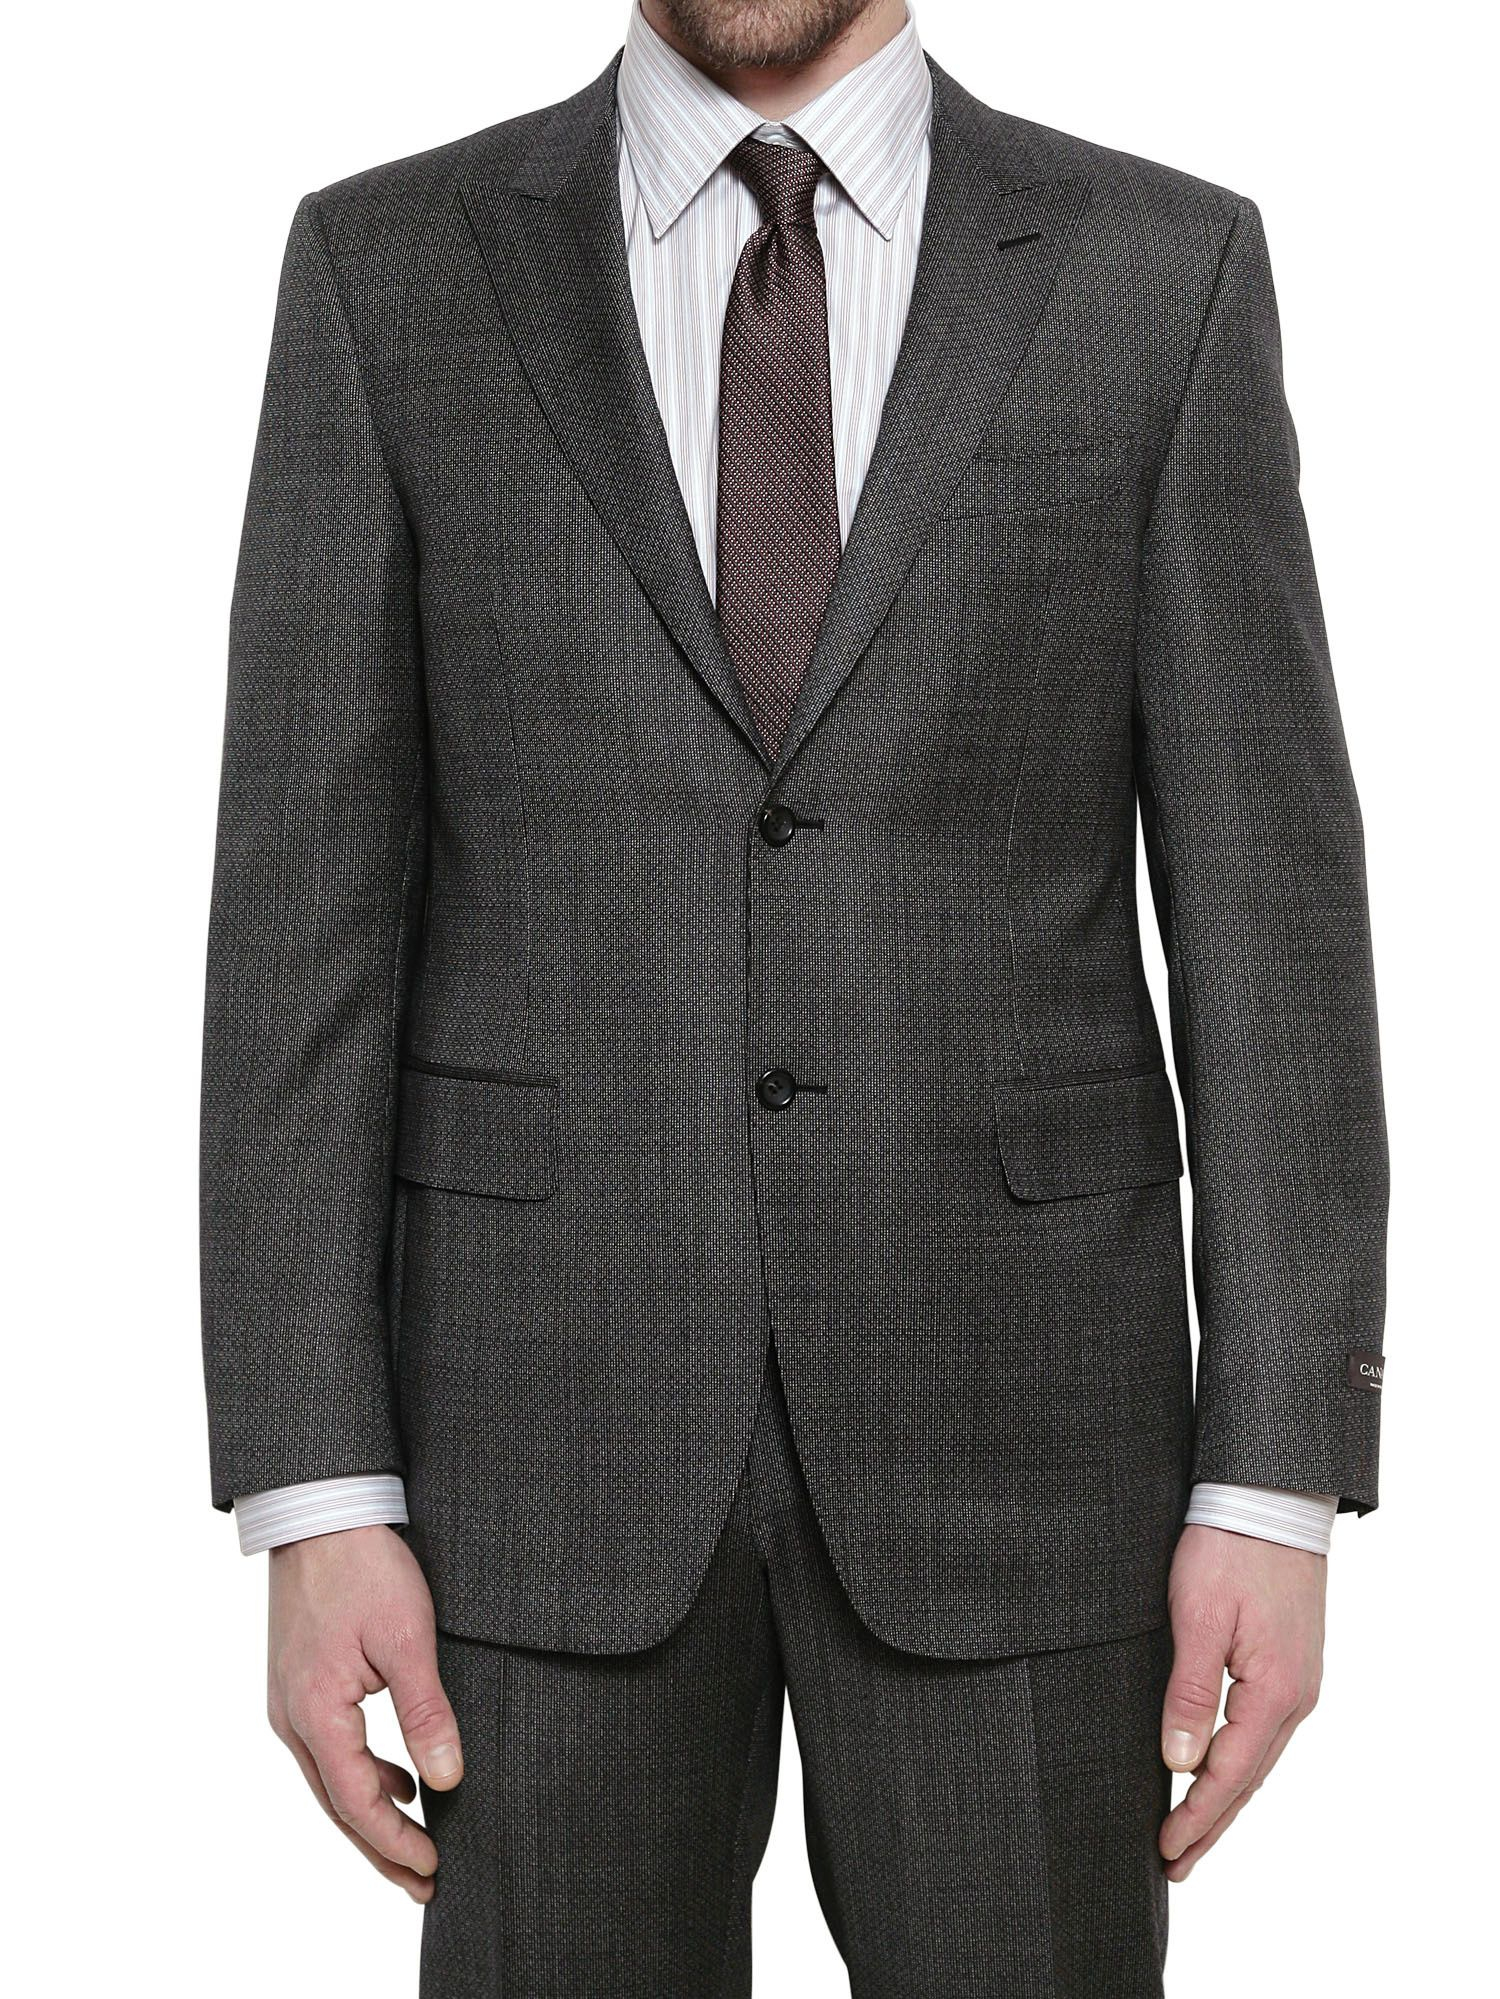 Lyst - Canali Two Button Open Weave Slim Fit Wool Suit in Gray for Men